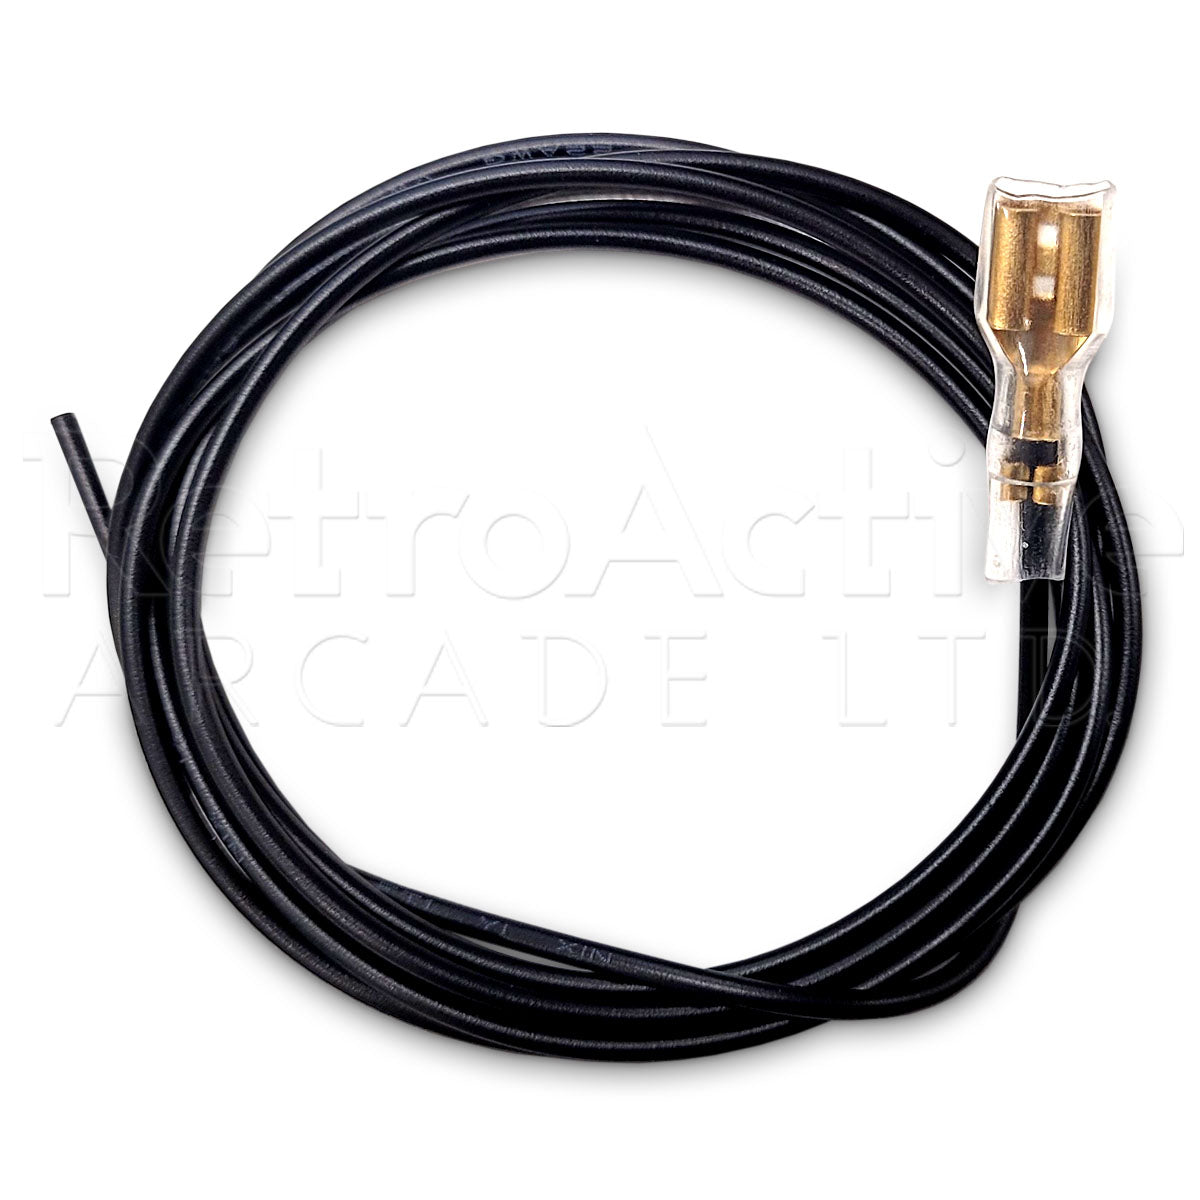 1 Meter Wire with .187" Connector - Black Wiring & Harnesses Universal - Retro Active Arcade